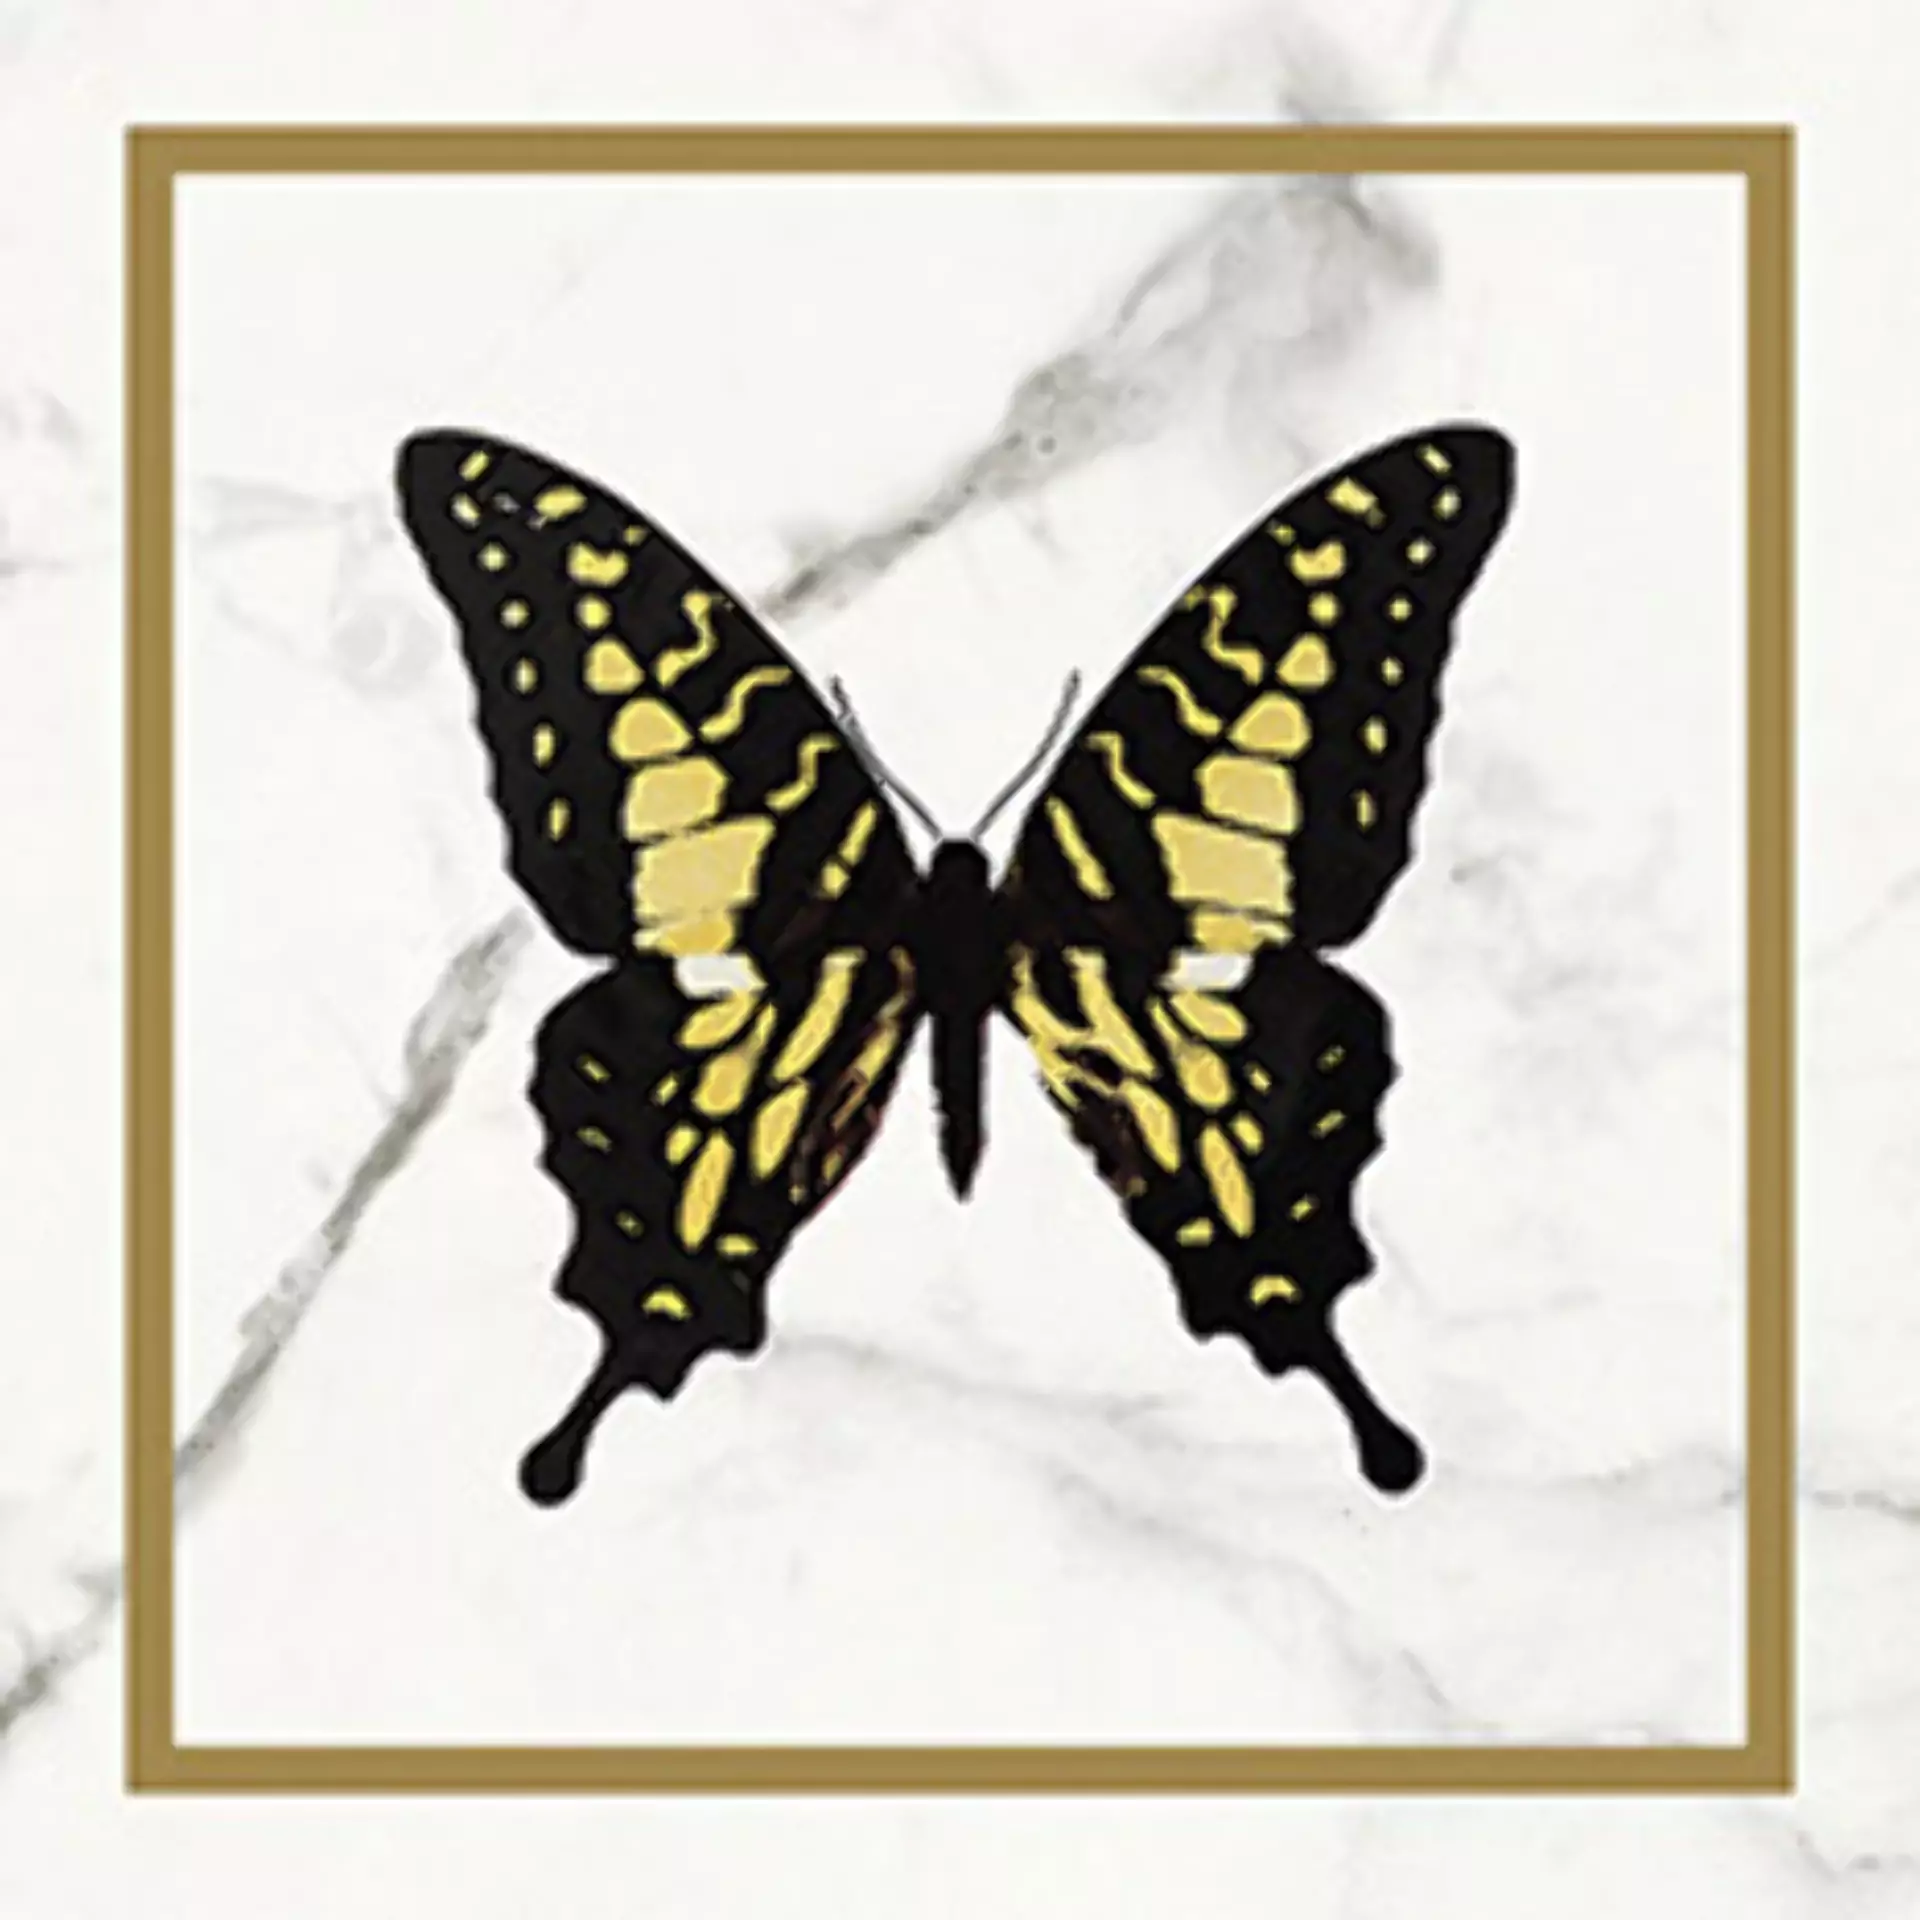 Villeroy & Boch Victorian White - Gold Glossy Decor Butterfly 1222-MK0E 20x20cm rectified 10mm